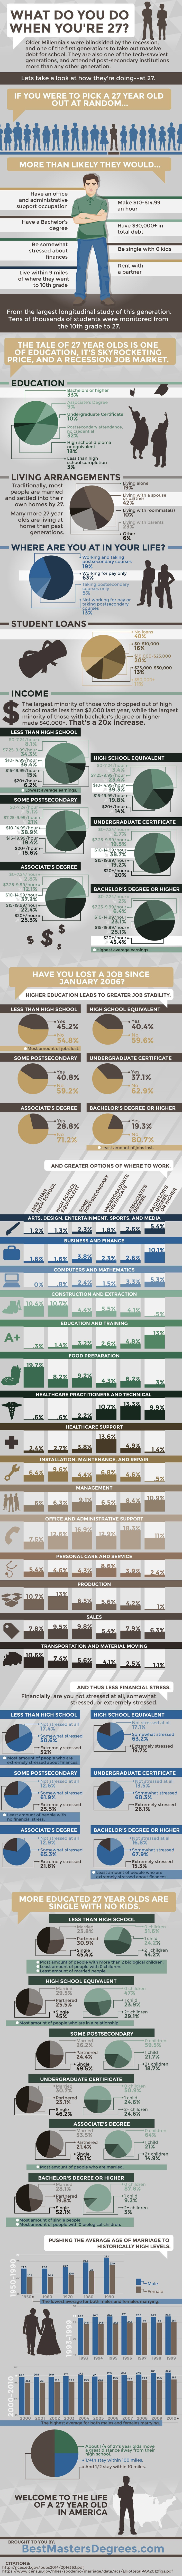 The Life of a 27 year old in America – Millennials Infographic